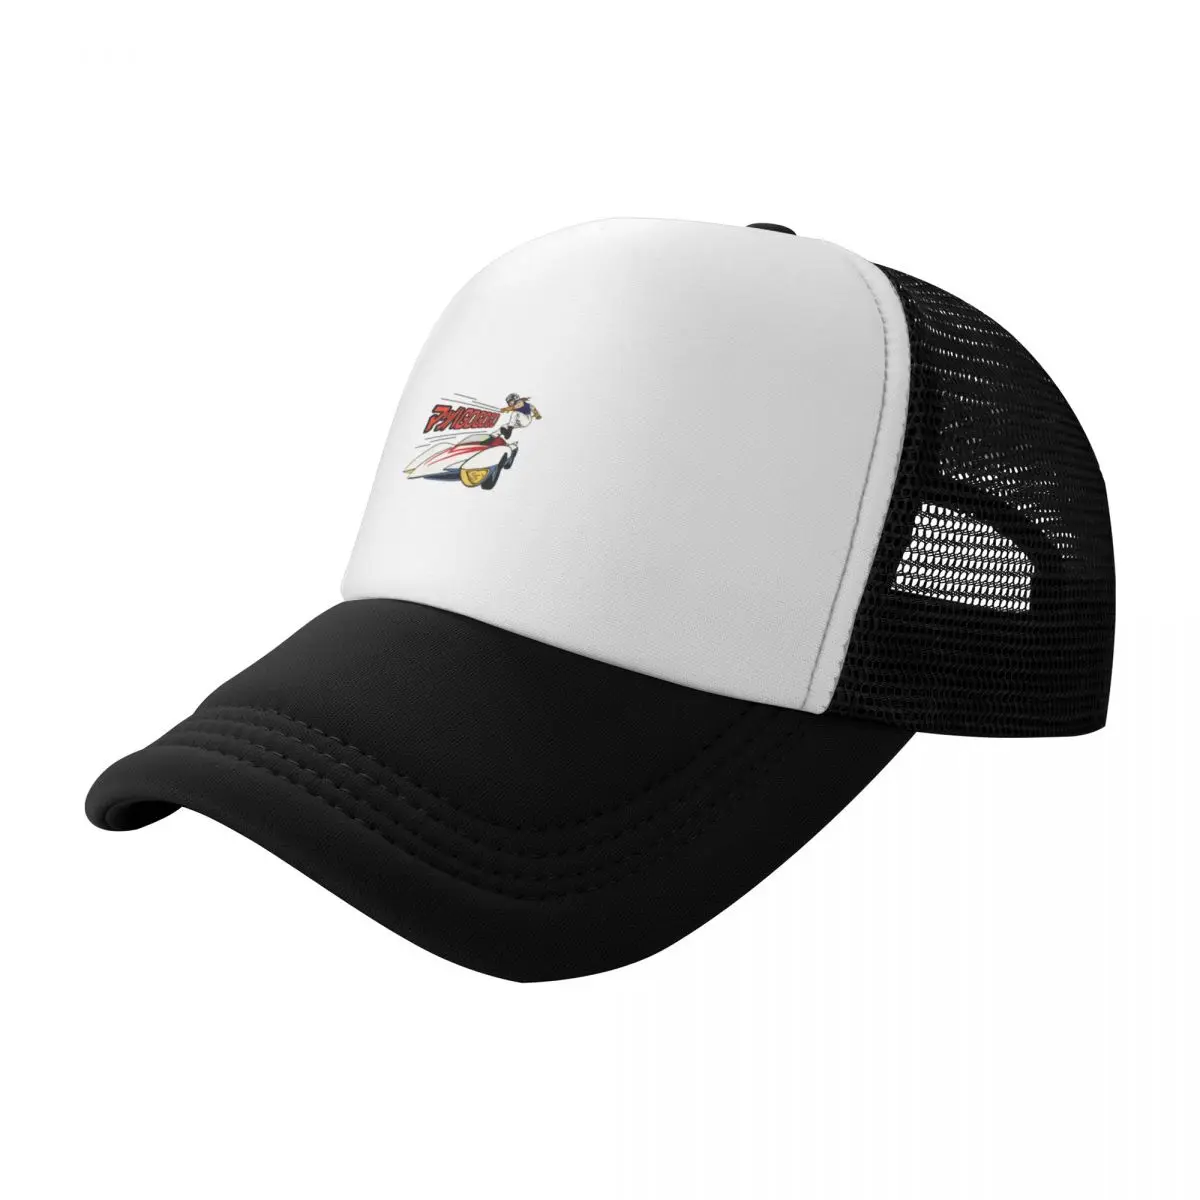 

Speed Racer Mach GoGoGo Exclusive- Limited Edition | Perfect Gift Love speed racer Baseball Cap Beach Outing black Woman Men's